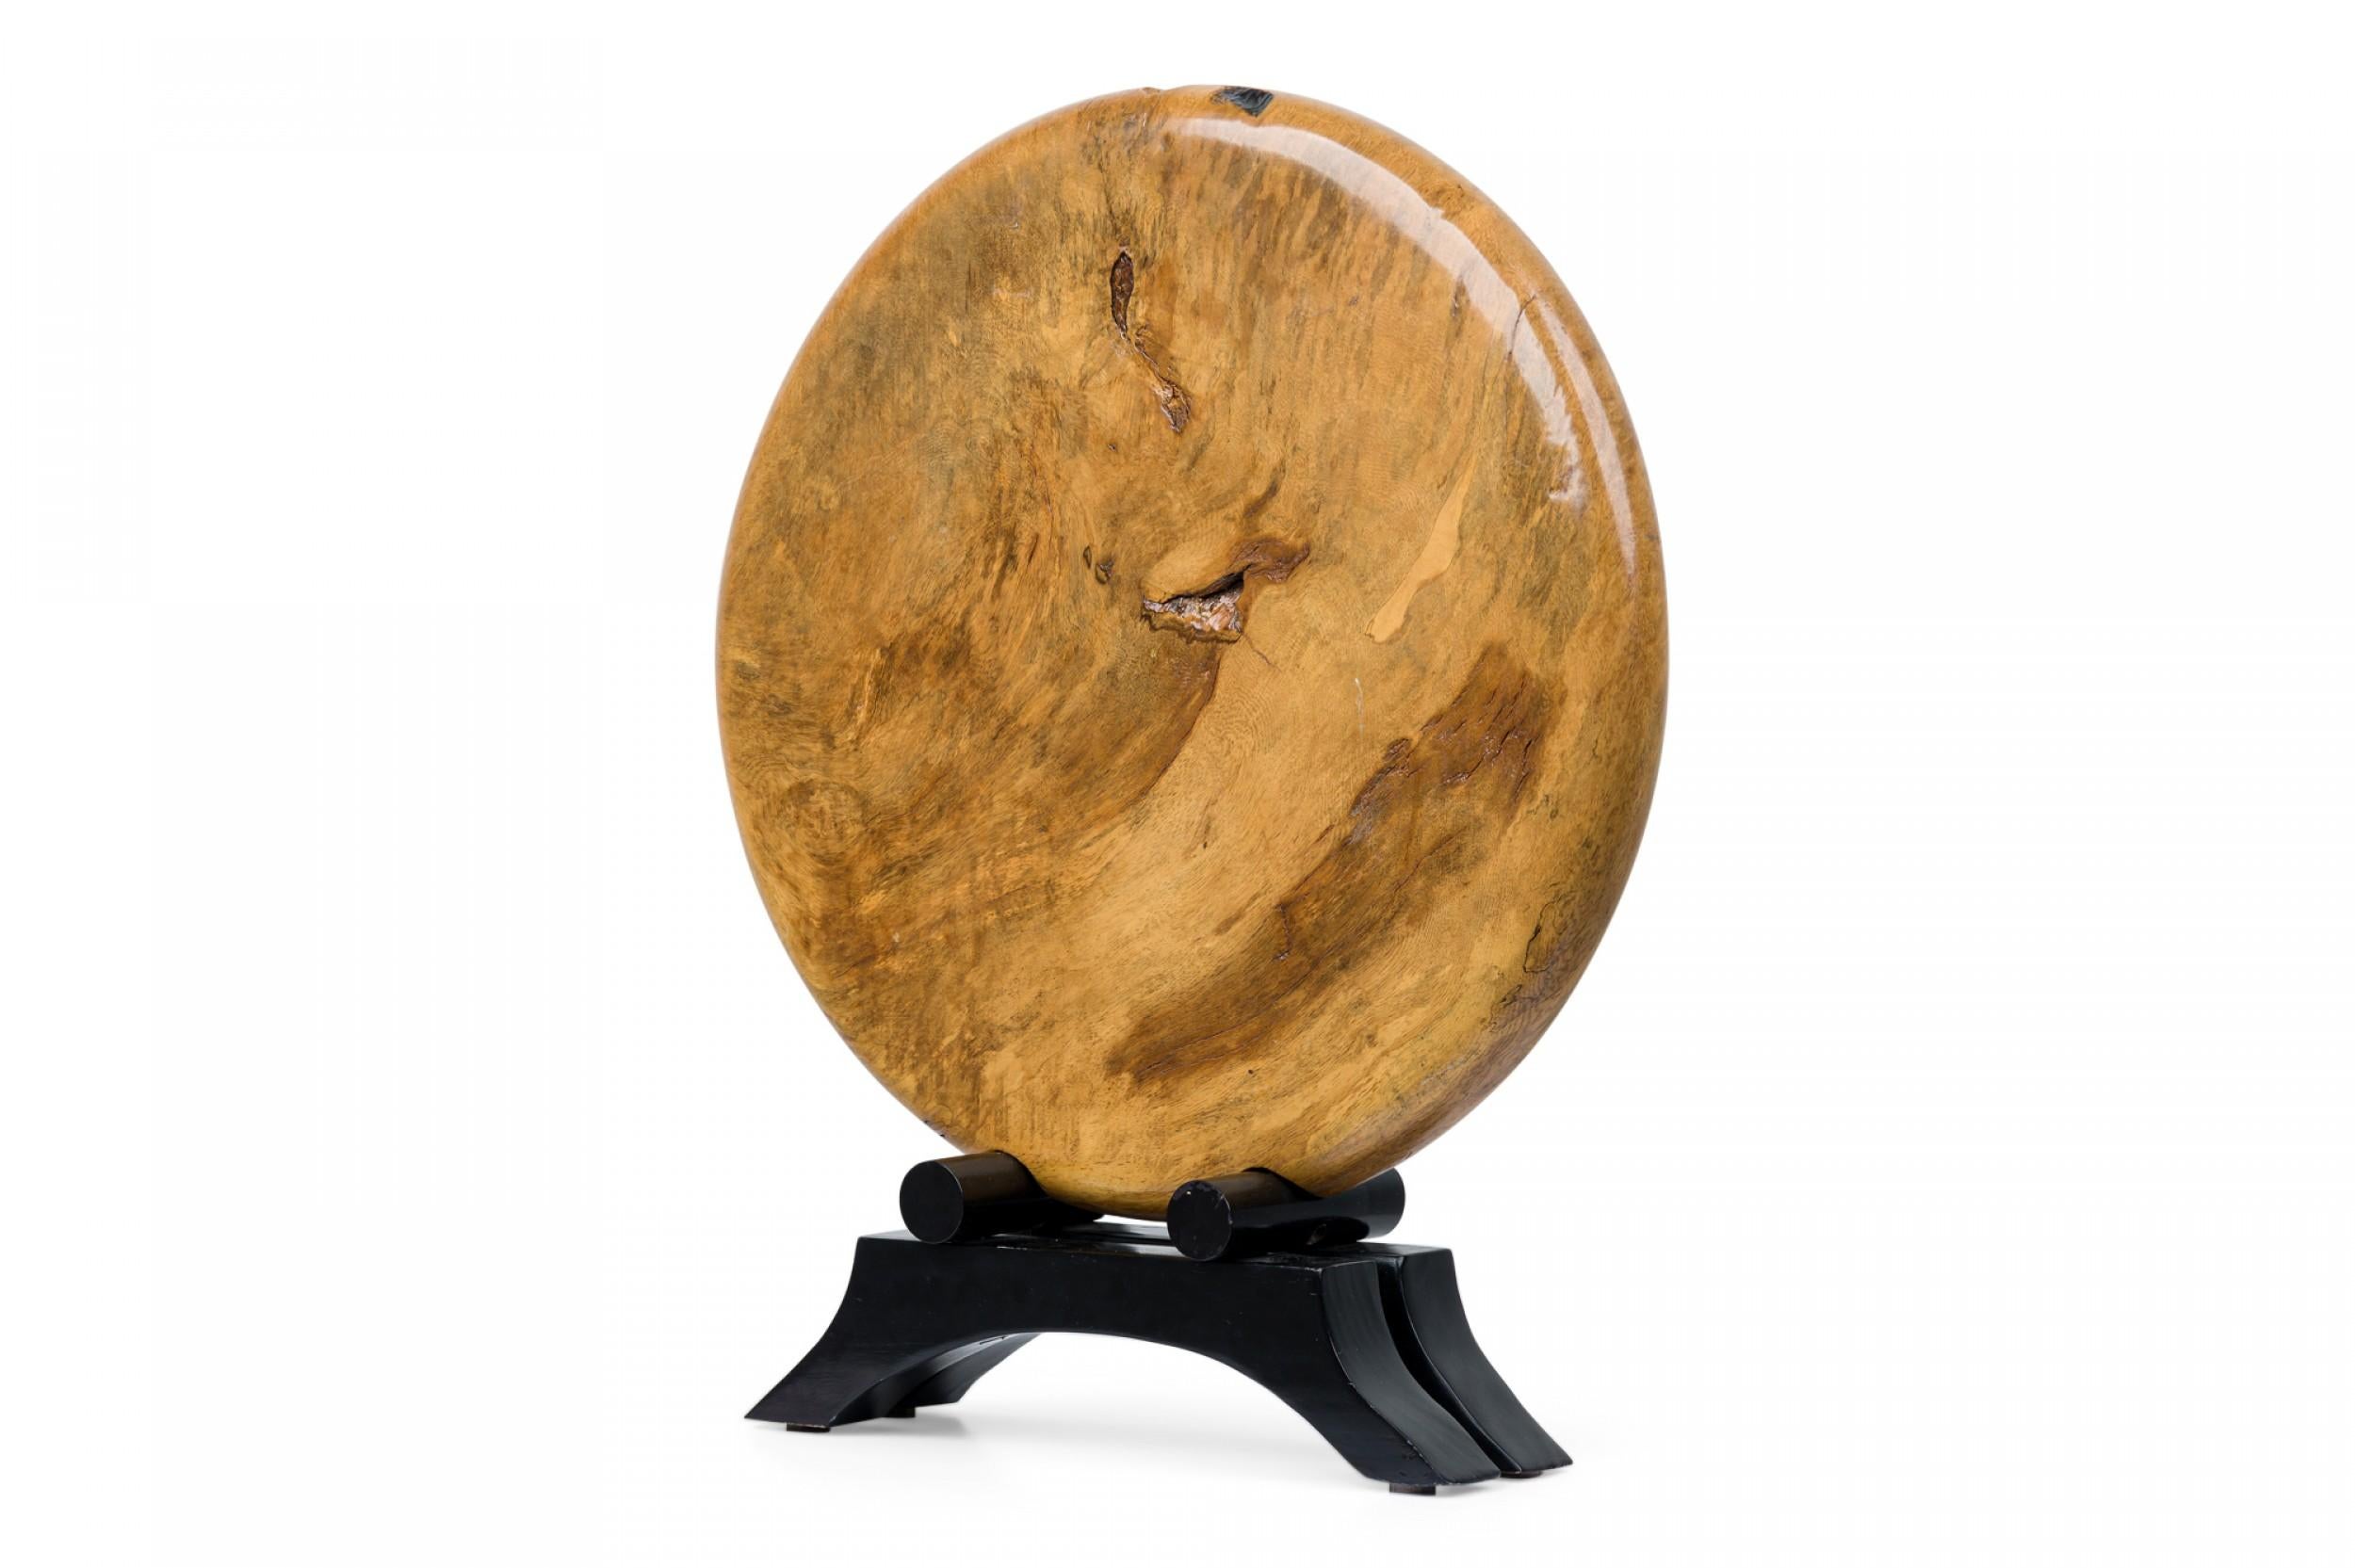 Contemporary American Modern circular / disc wood sculpture on and ebonized stand.